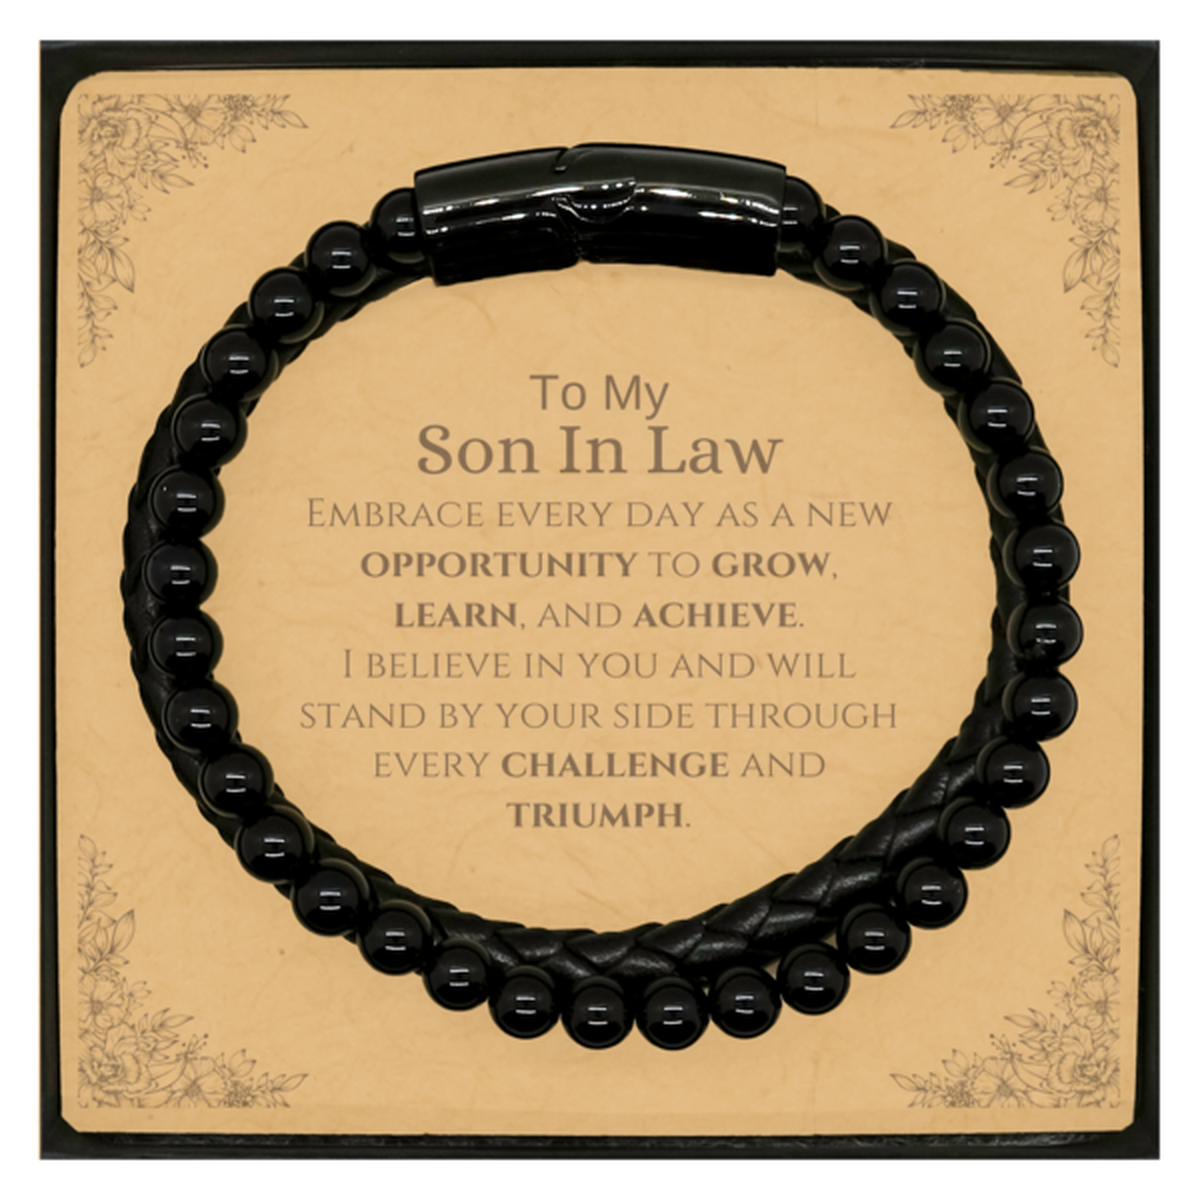 To My Son In Law Gifts, I believe in you and will stand by your side, Inspirational Stone Leather Bracelets For Son In Law, Birthday Christmas Motivational Son In Law Gifts